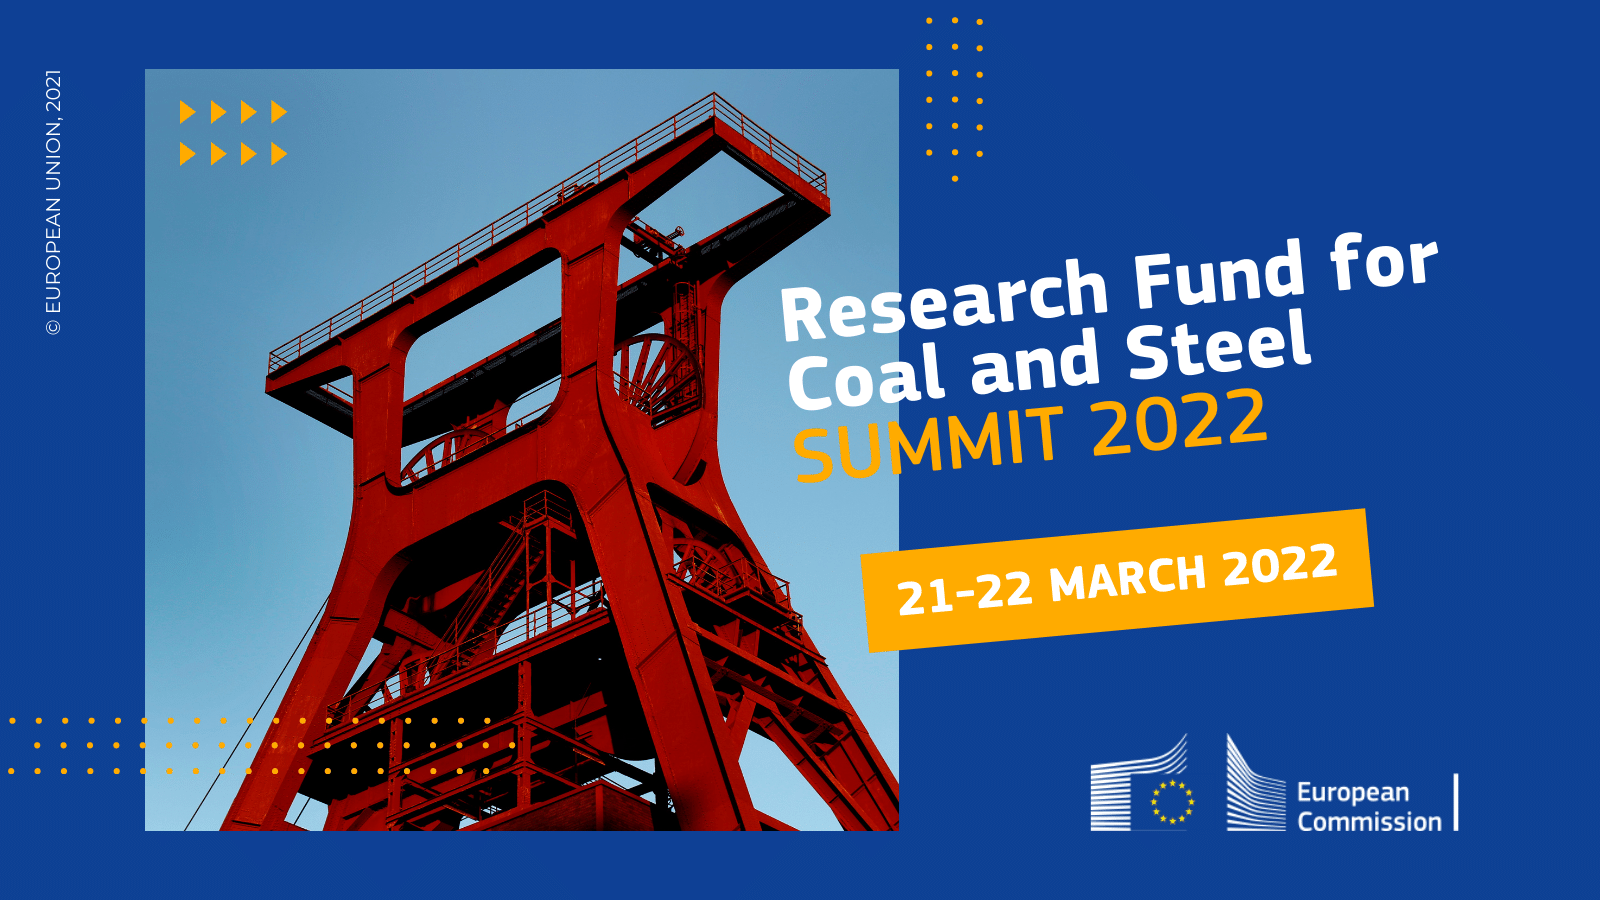 Save the date: Research Fund for Coal and Steel Summit 2022 on 21/22 March